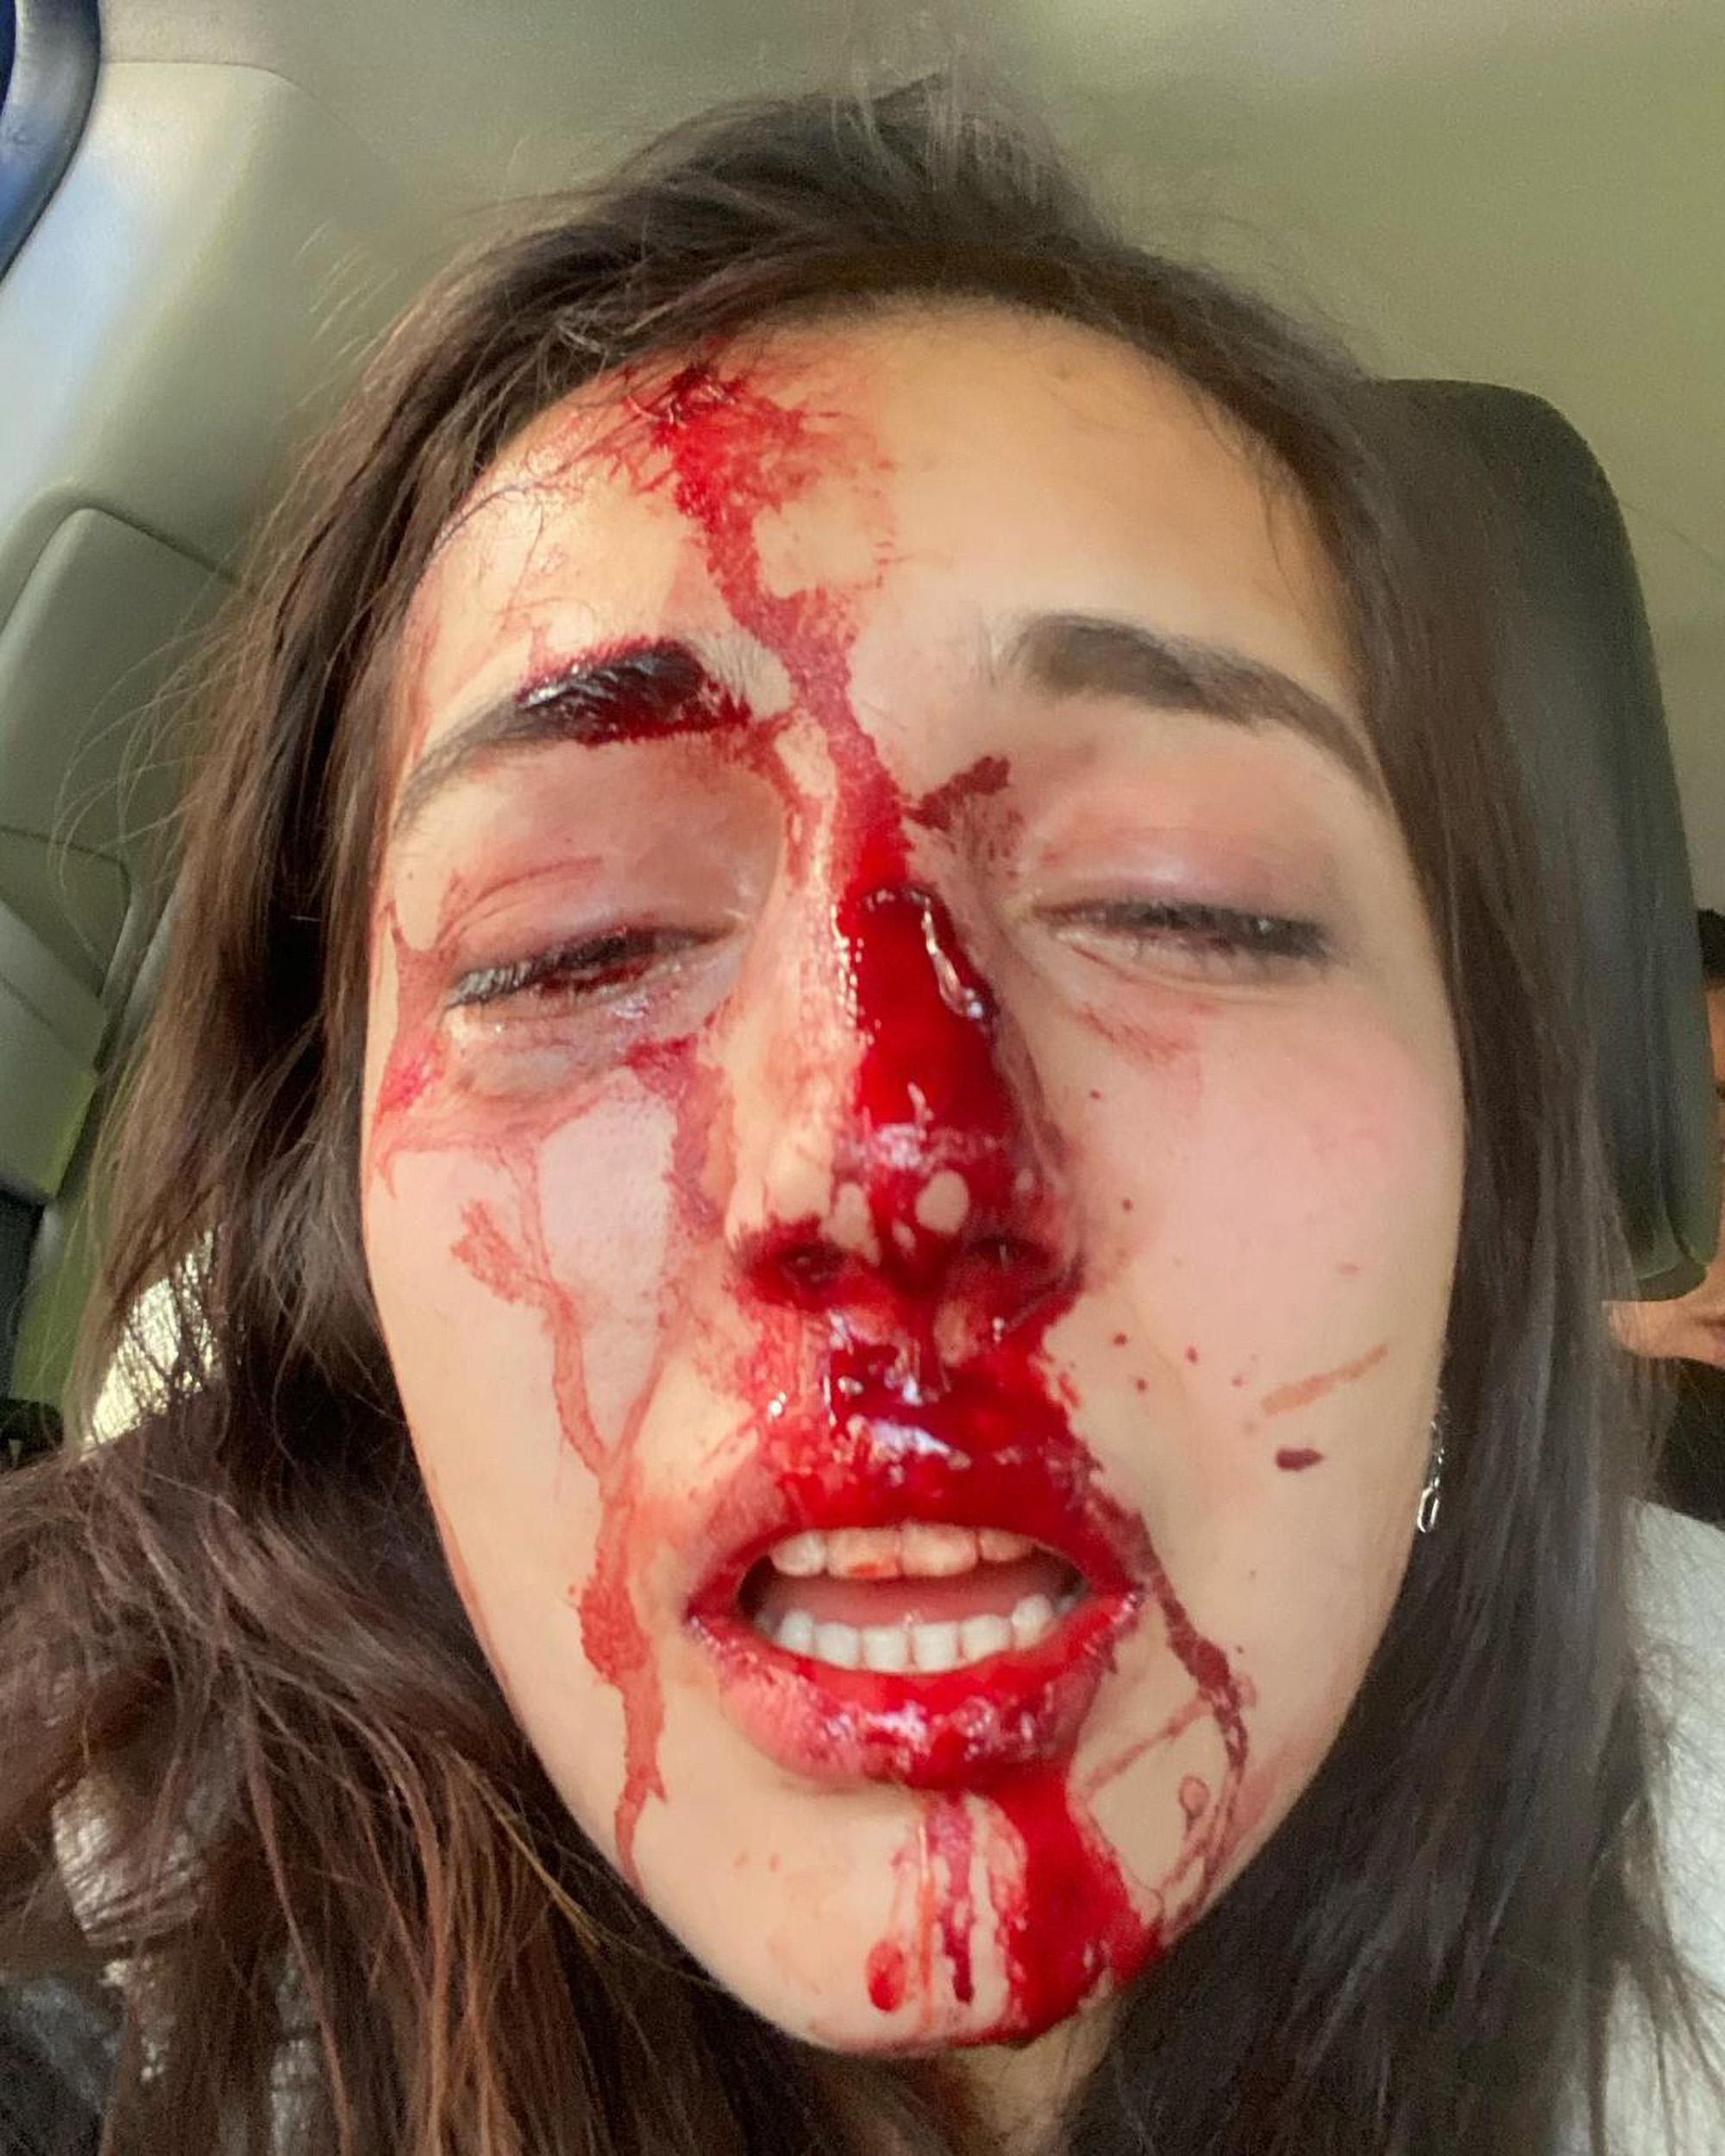 Read more about the article Model Shares Shock Images Of Facial Injuries In Viral Posts That Launch Investigation Against Boyfriend